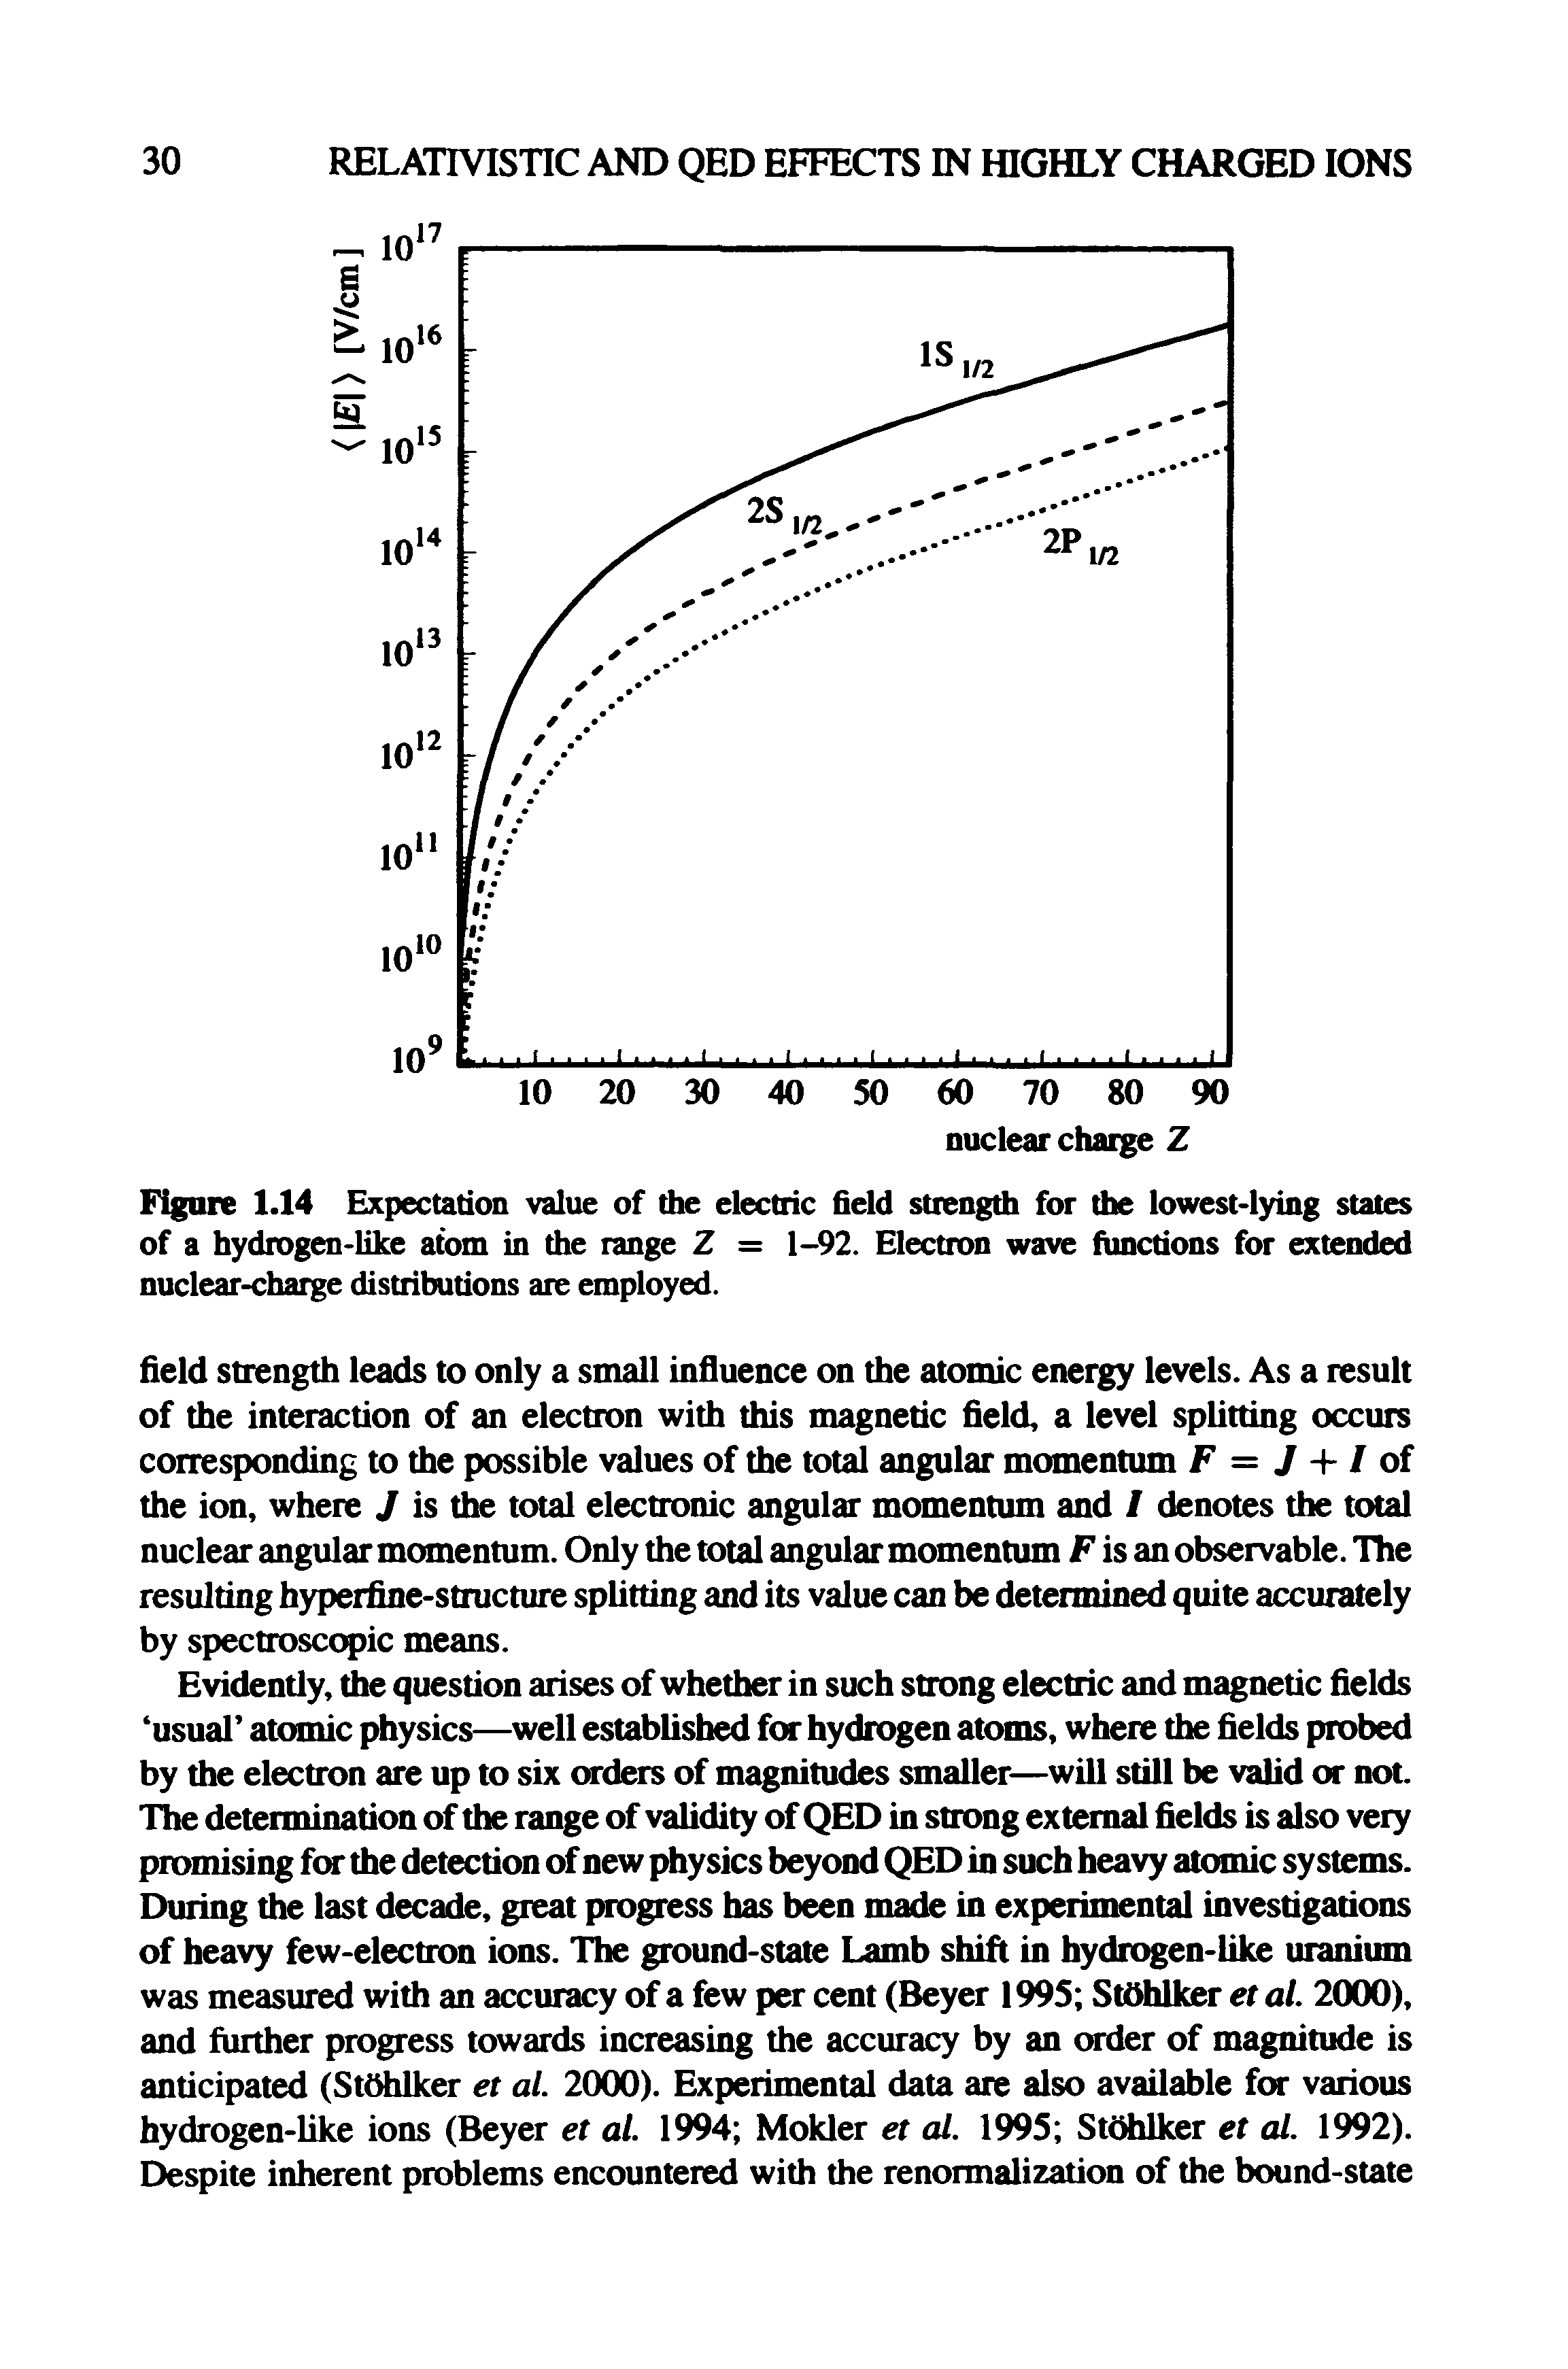 Figure 1.14 Expectation value of the electric field strength for the lowest-lying states of a hydrogen-like atom in the range Z = 1-92. Electron wave functions for extended nuclear-charge distributions are employed.